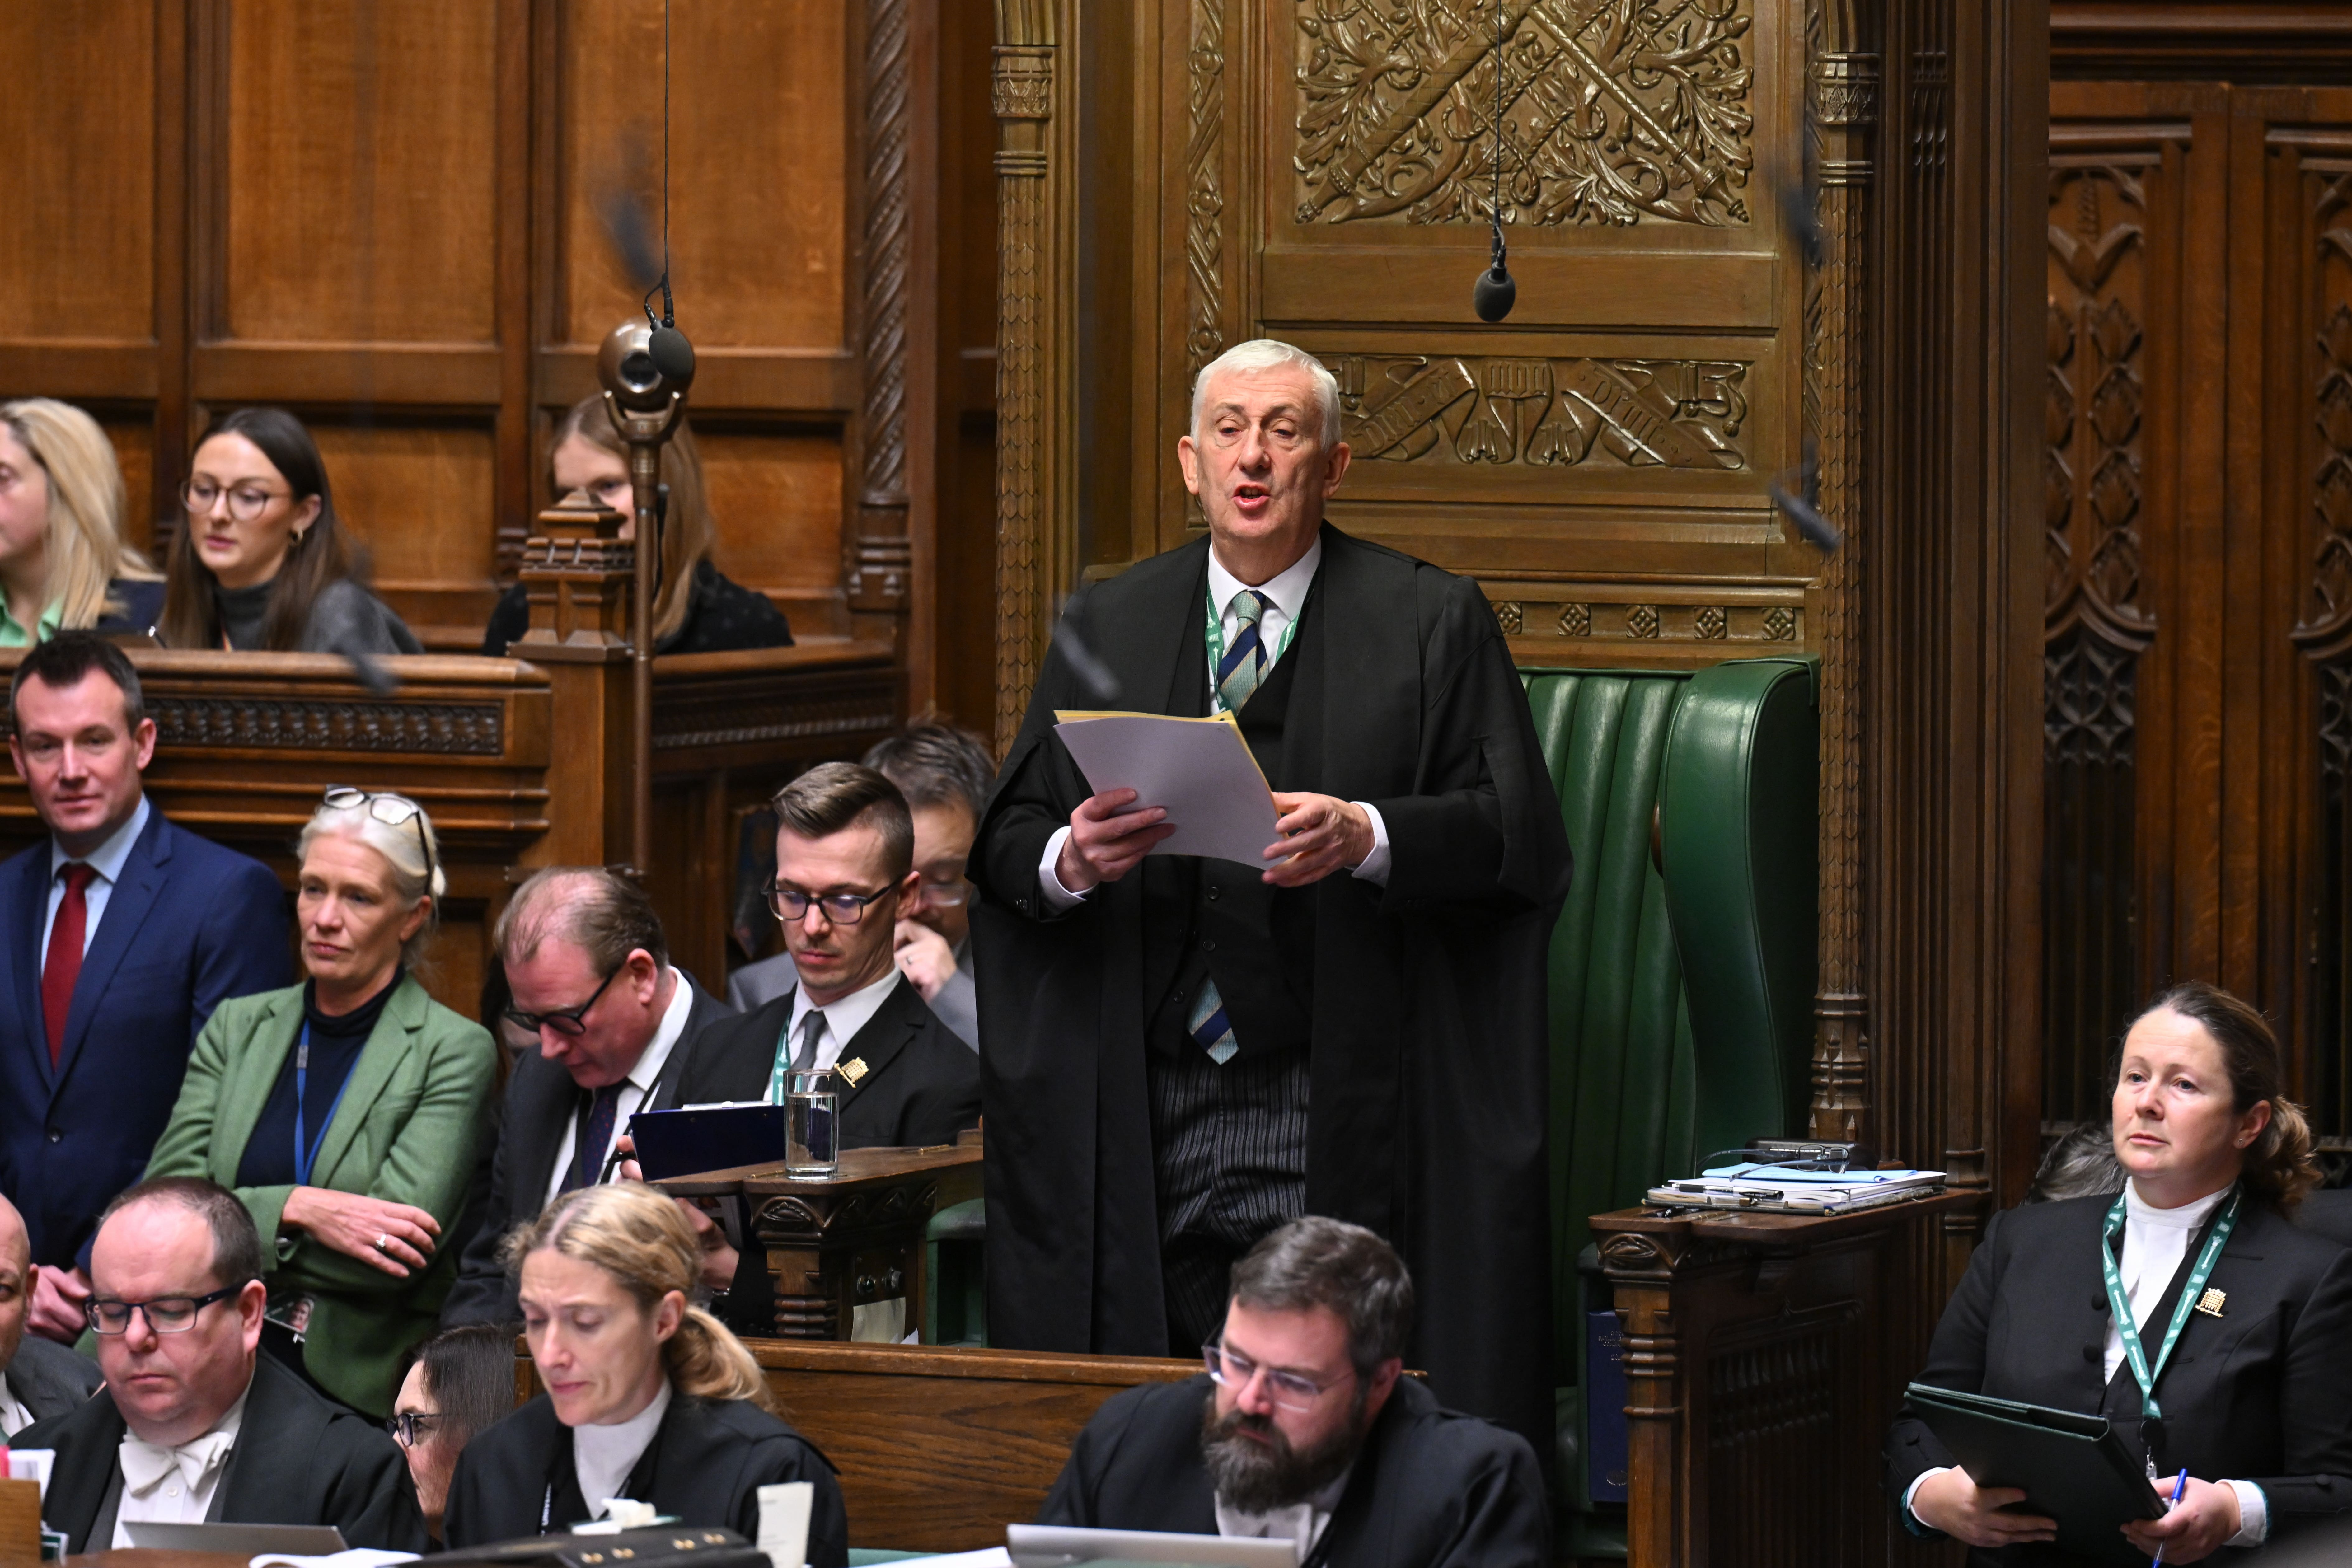 House speaker Sir Lindsay Hoyle announced that he would allow a Labour amendment to a Scottish National Party motion on an ‘immediate ceasefire’ in Gaza